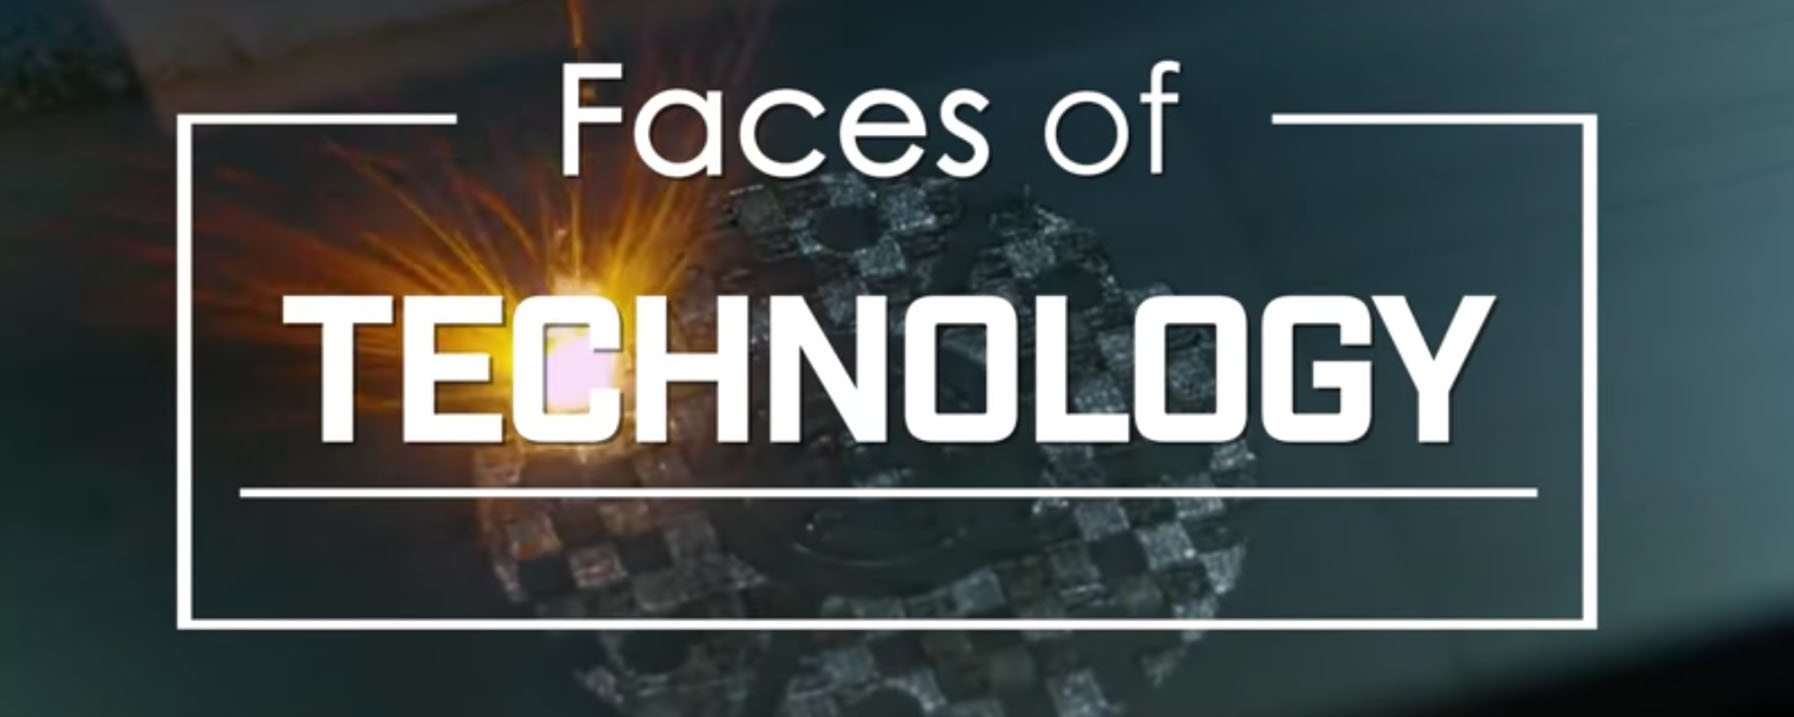 Faces of Technology